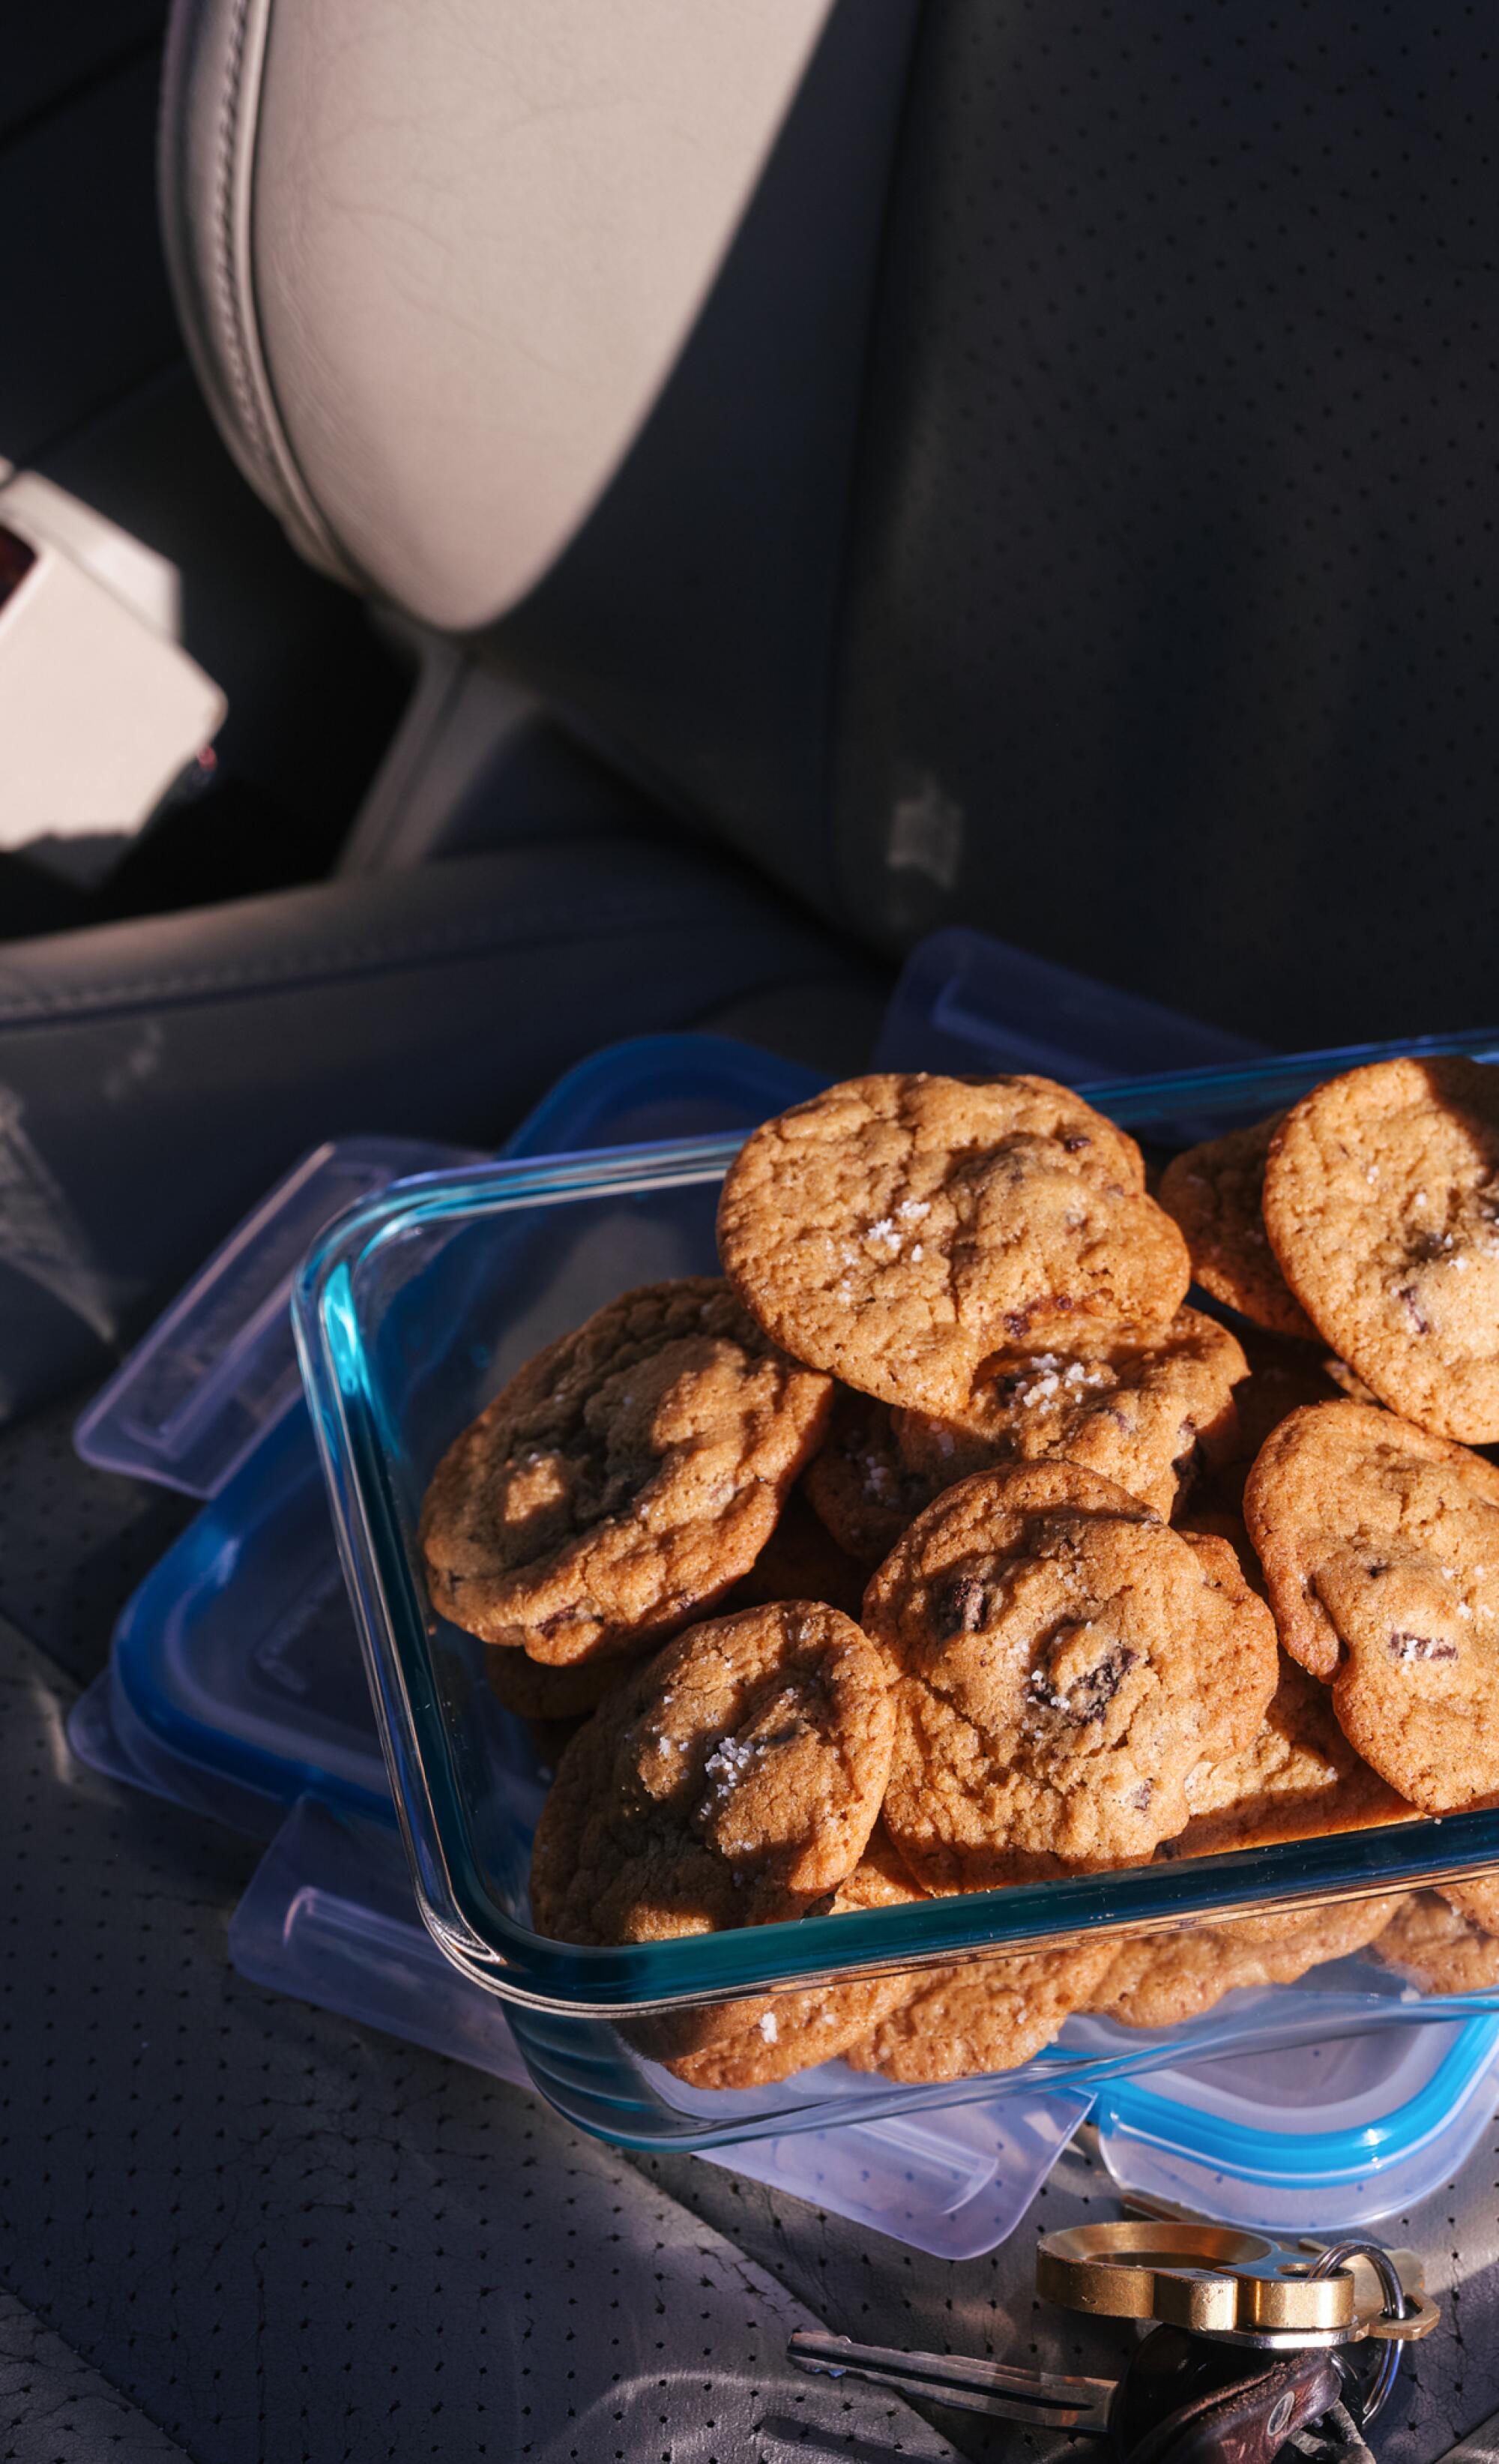 Take the ultimate chocolate chip cookies with you.